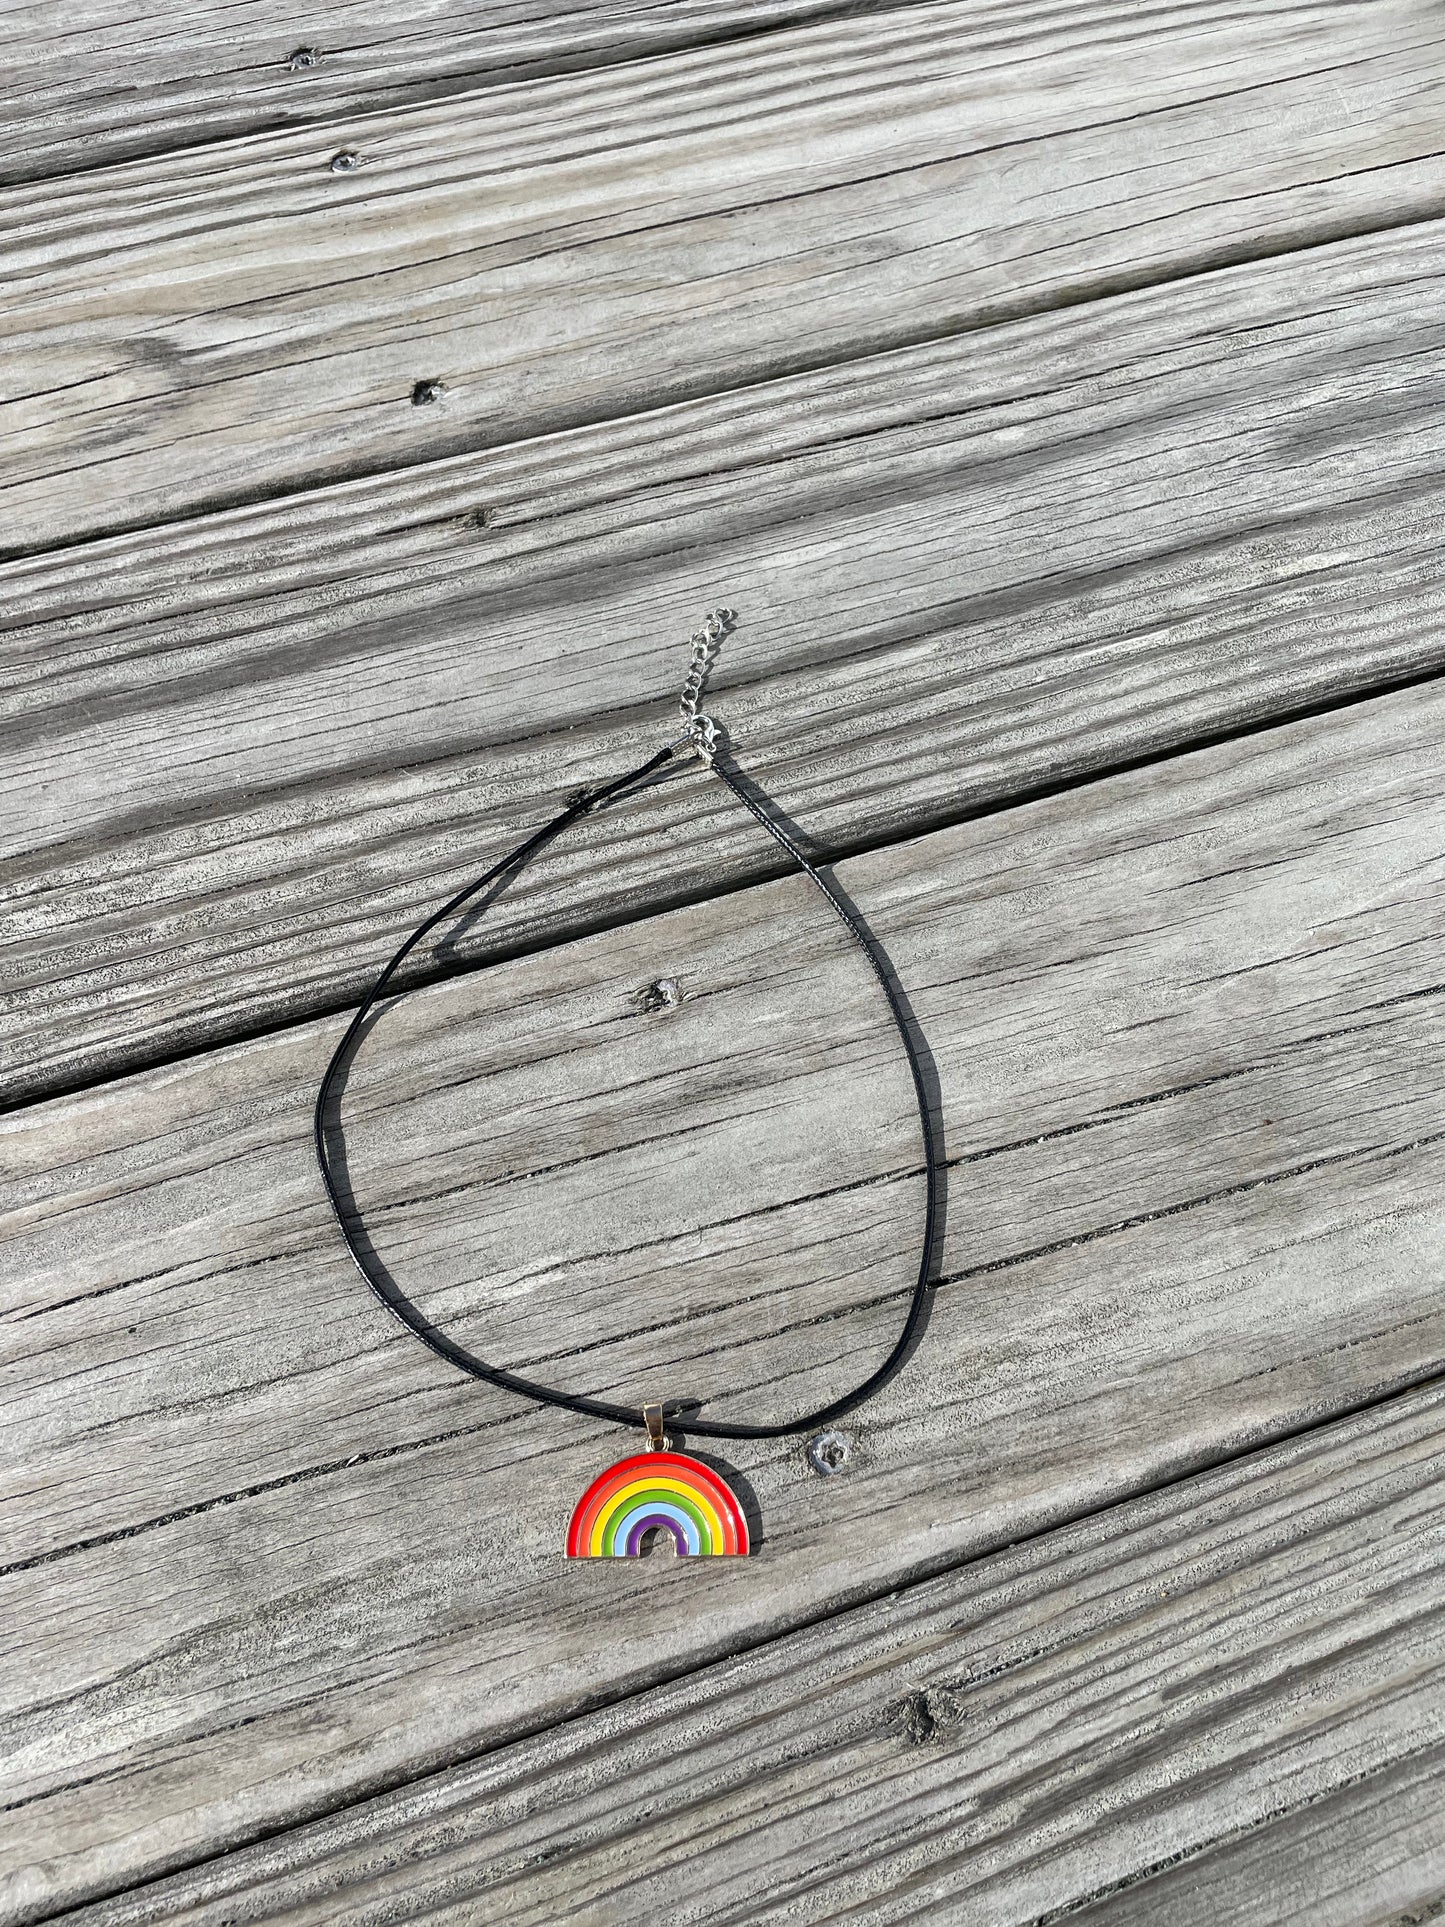 Full rainbow necklace showing adjustable cord laid out on deck